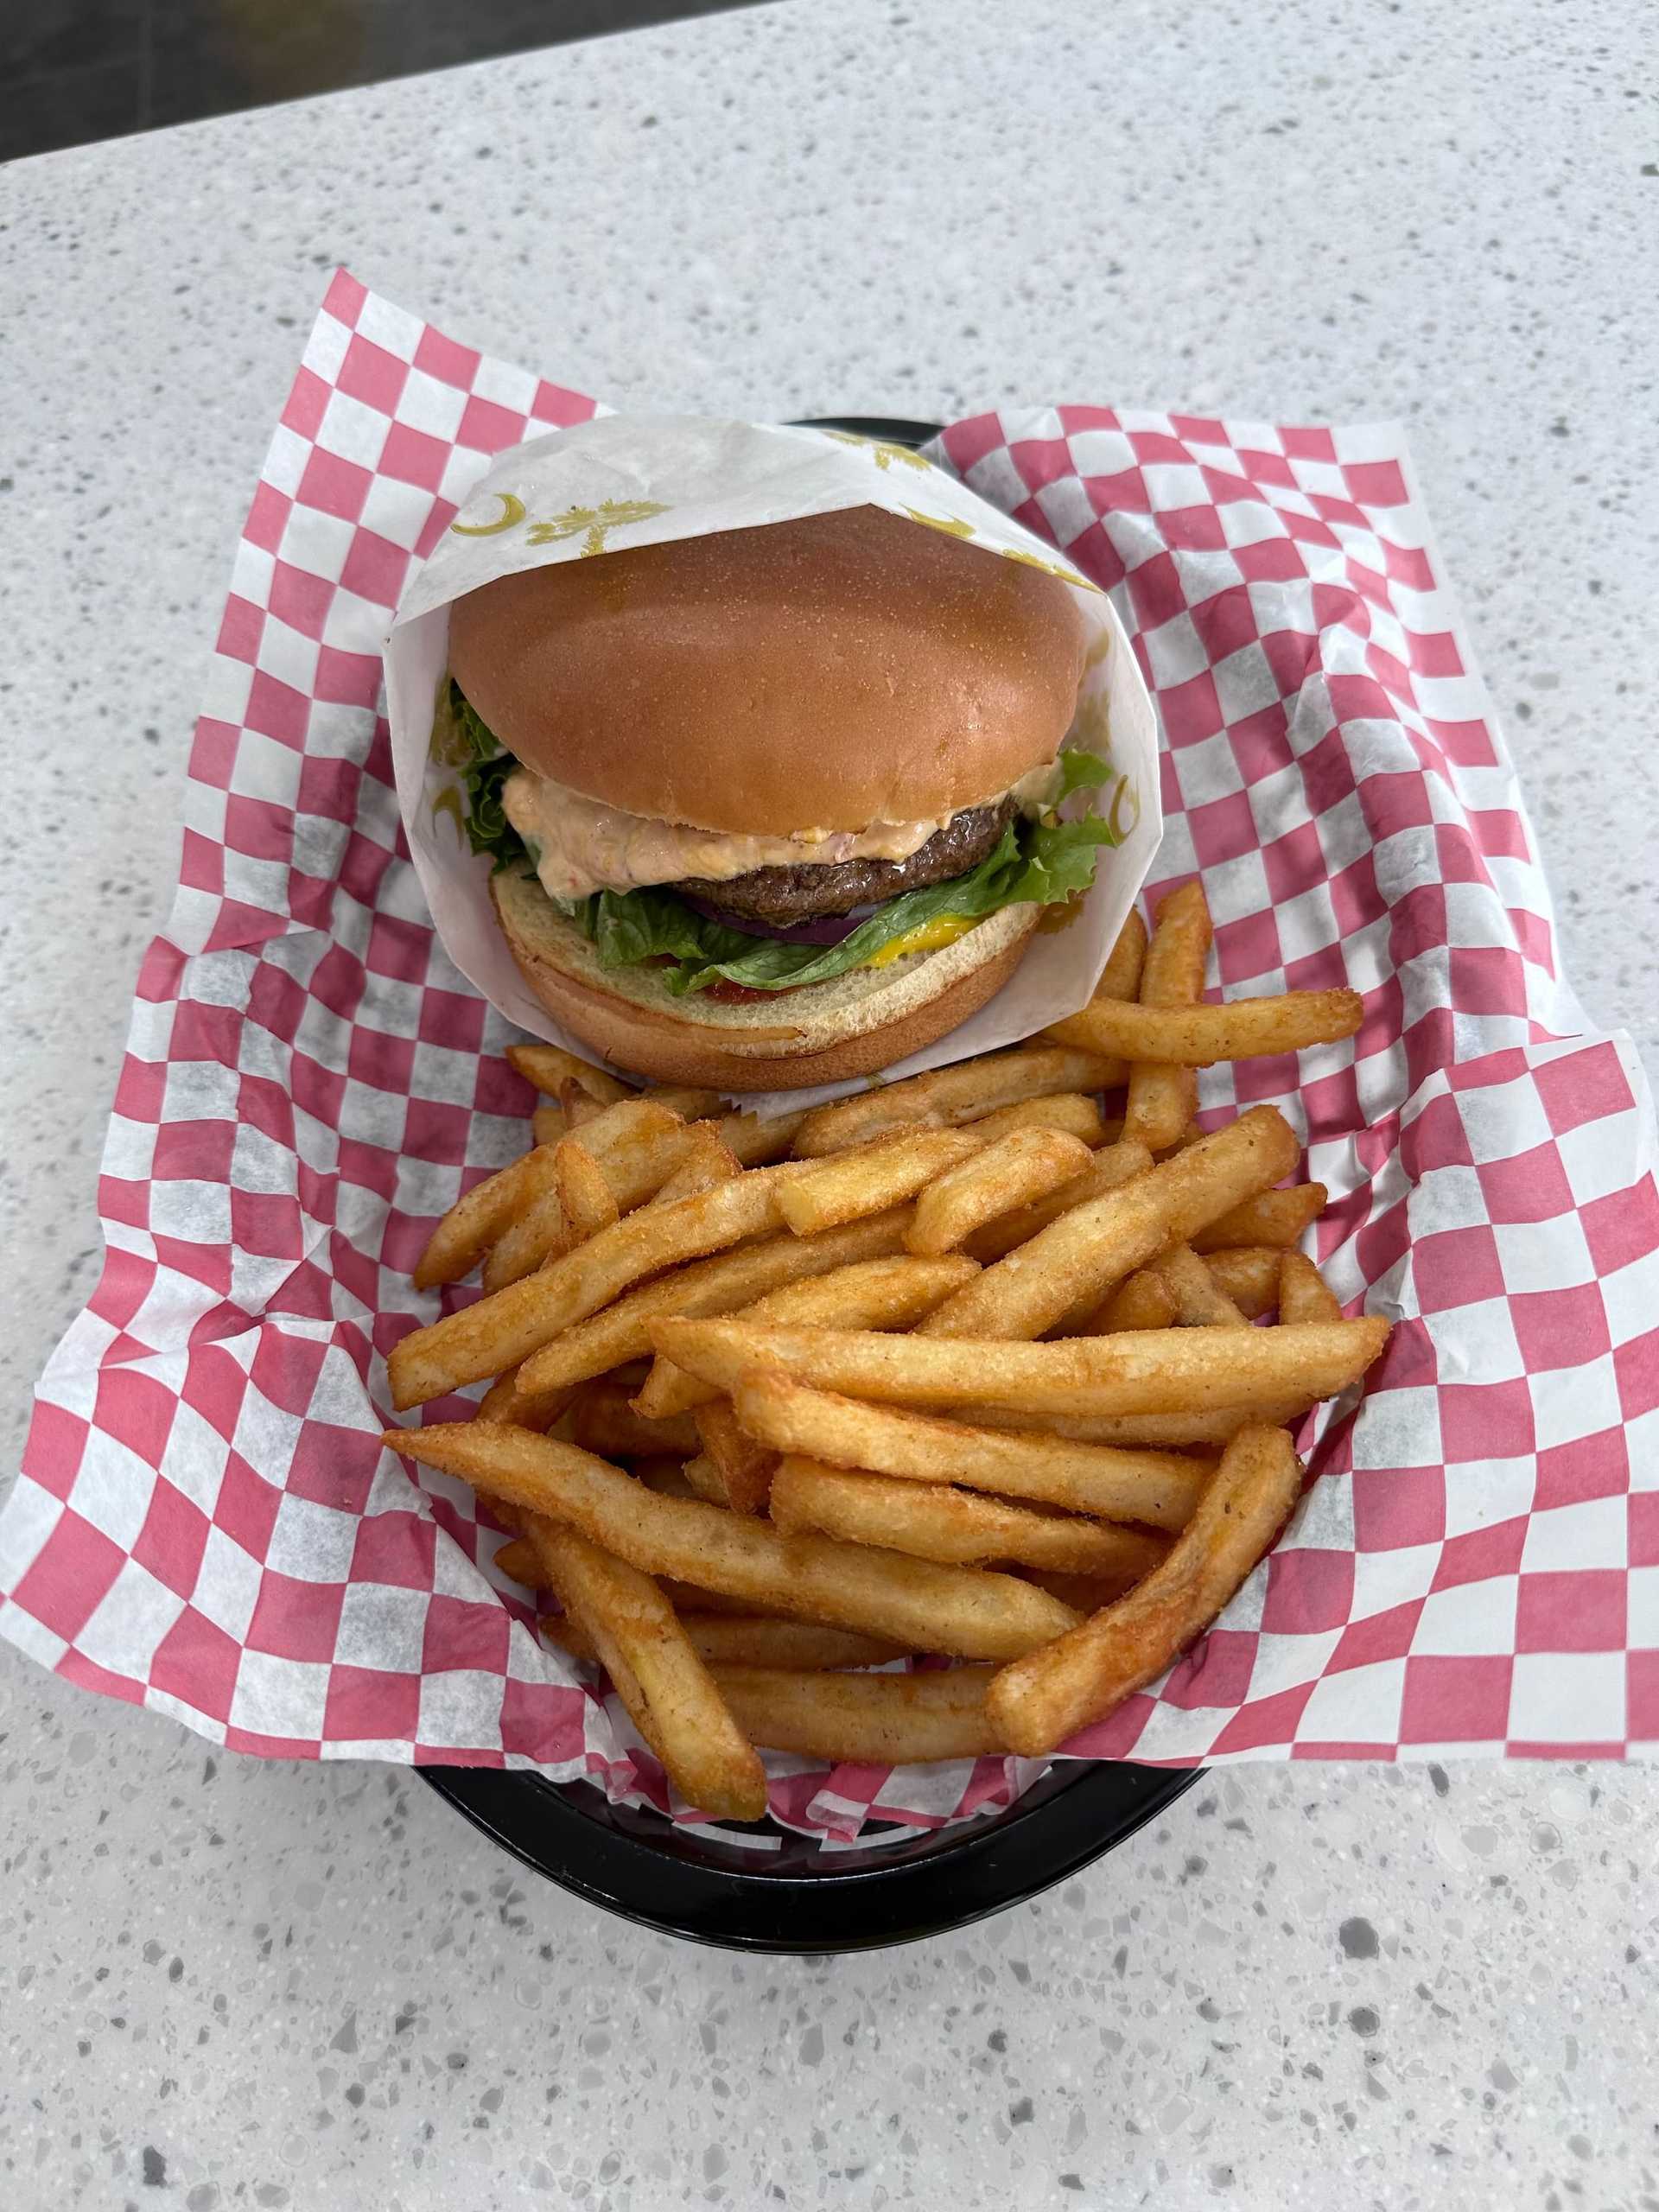 Burger with lettuce and sauce, served with crispy fries on red and white checkered paper.